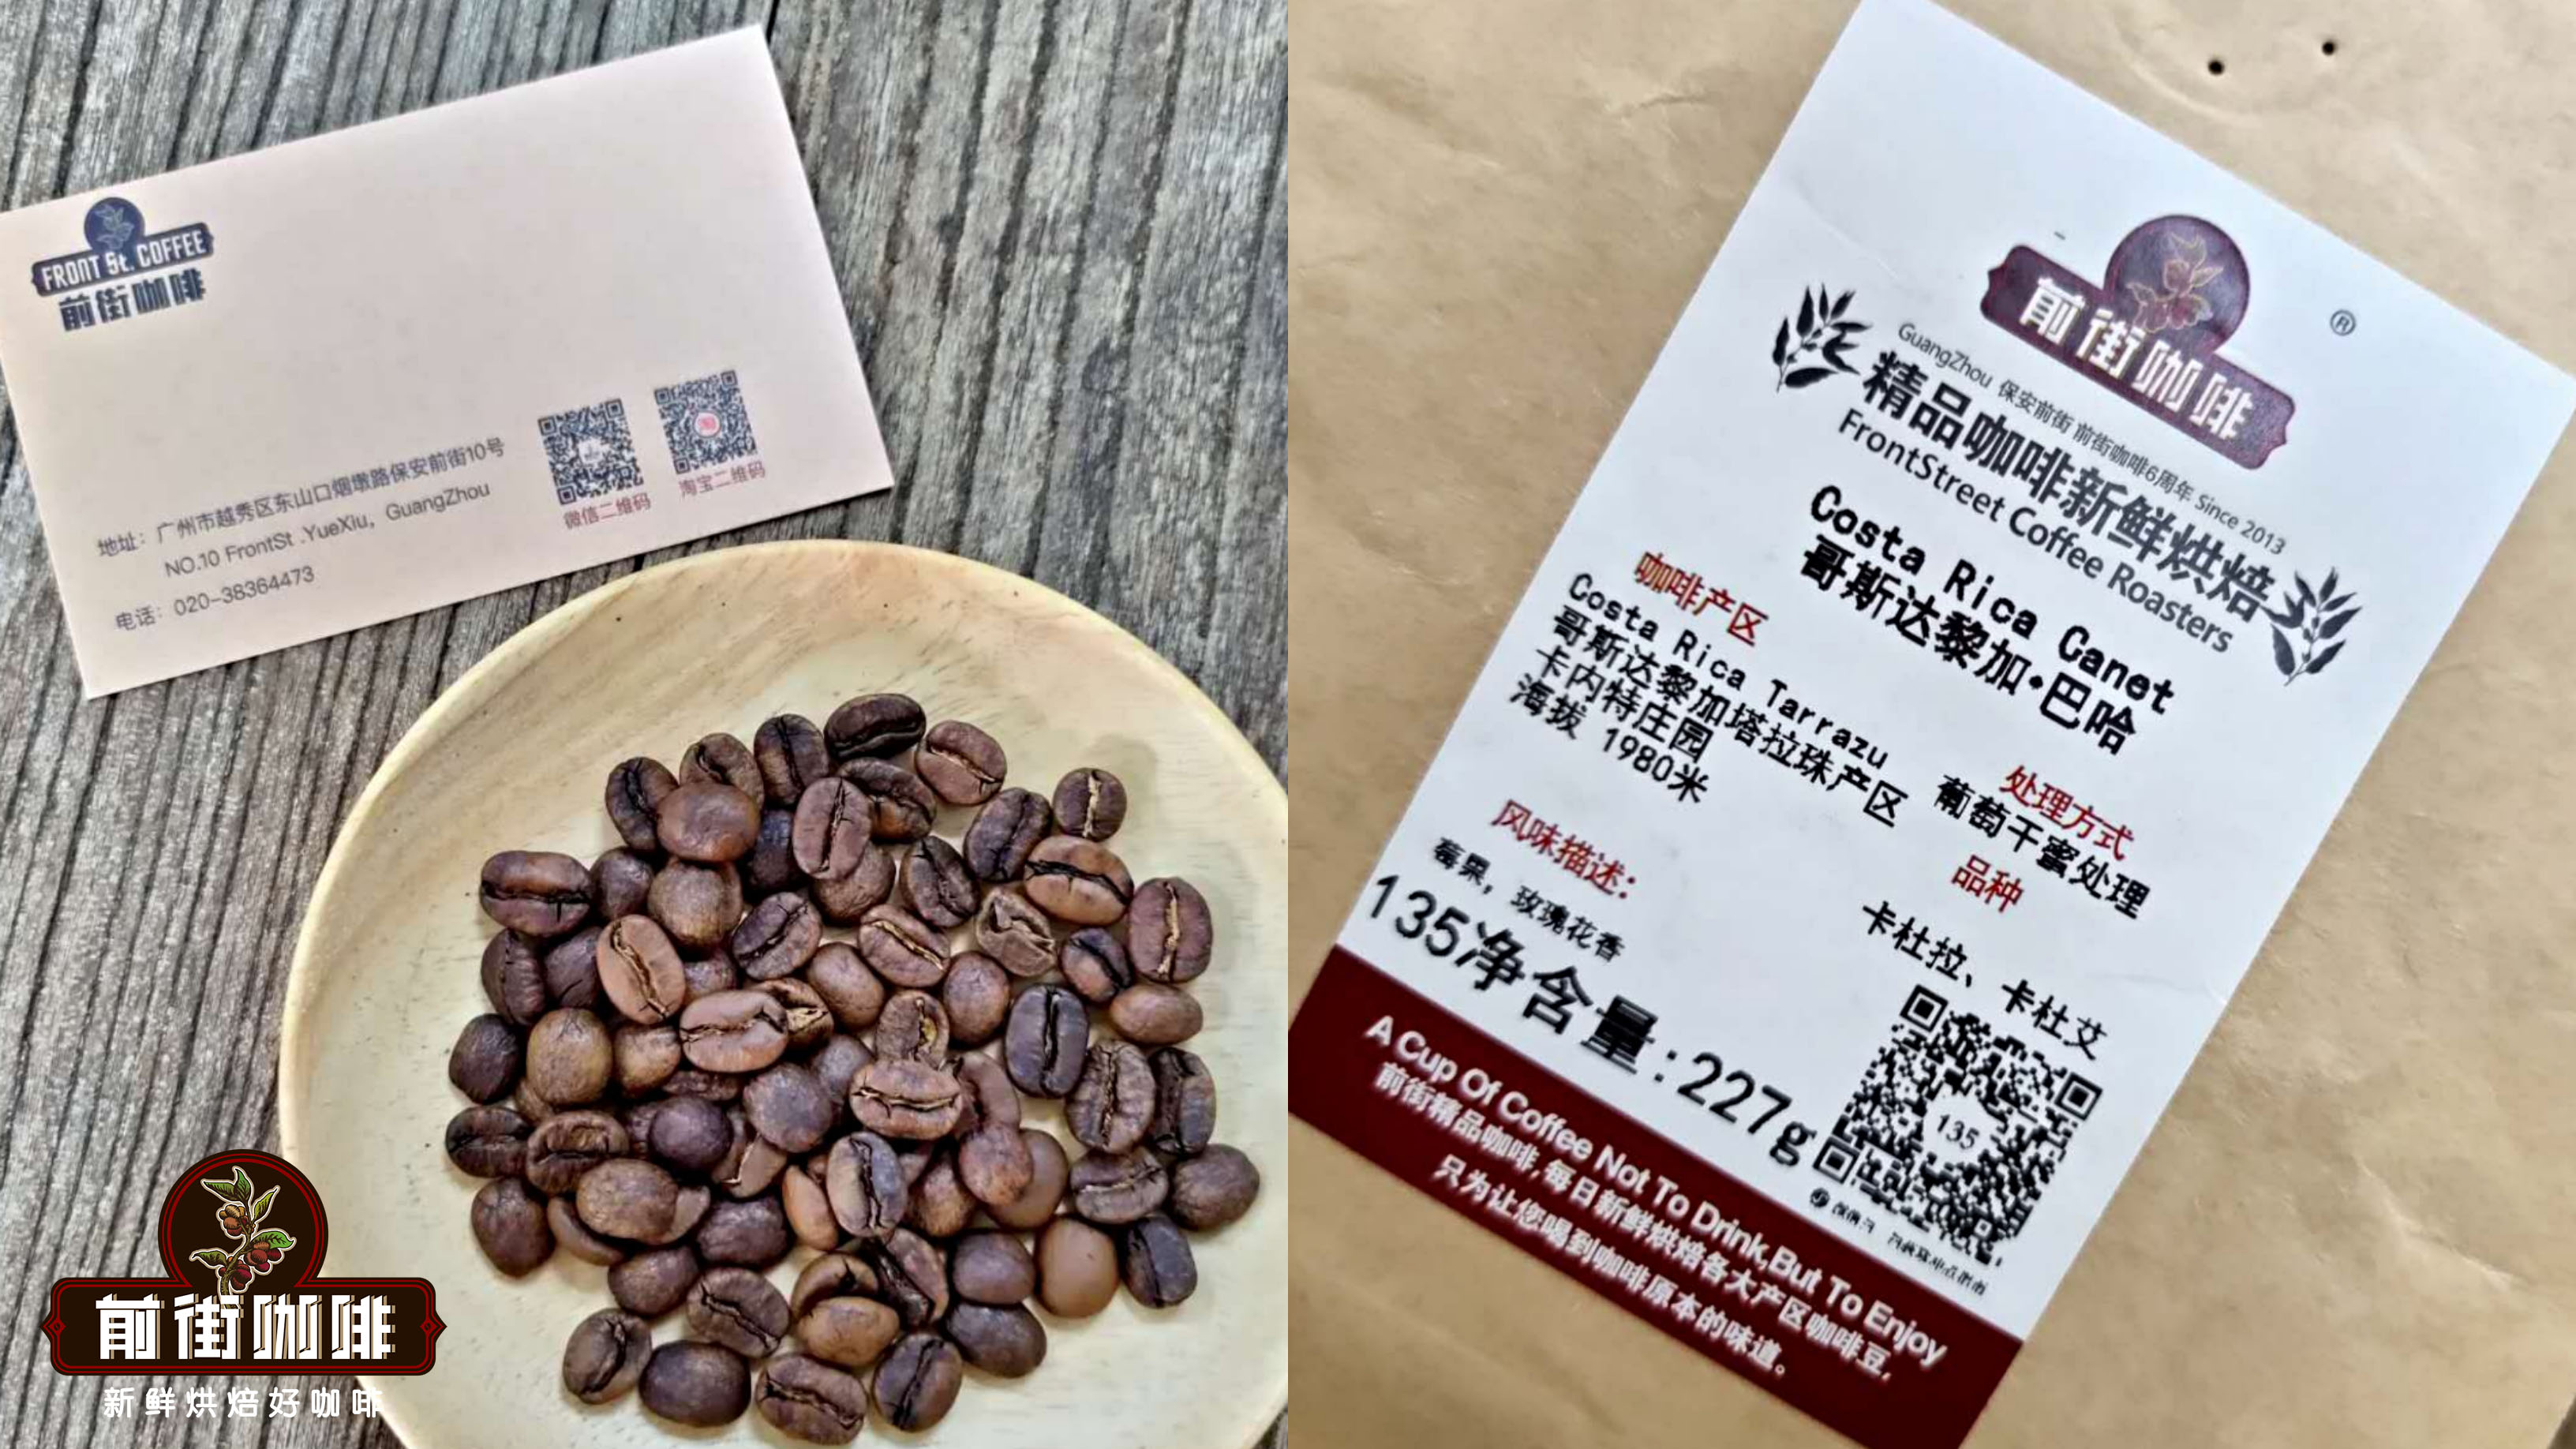 Does Costa Rican musician series coffee beans have additives after all?